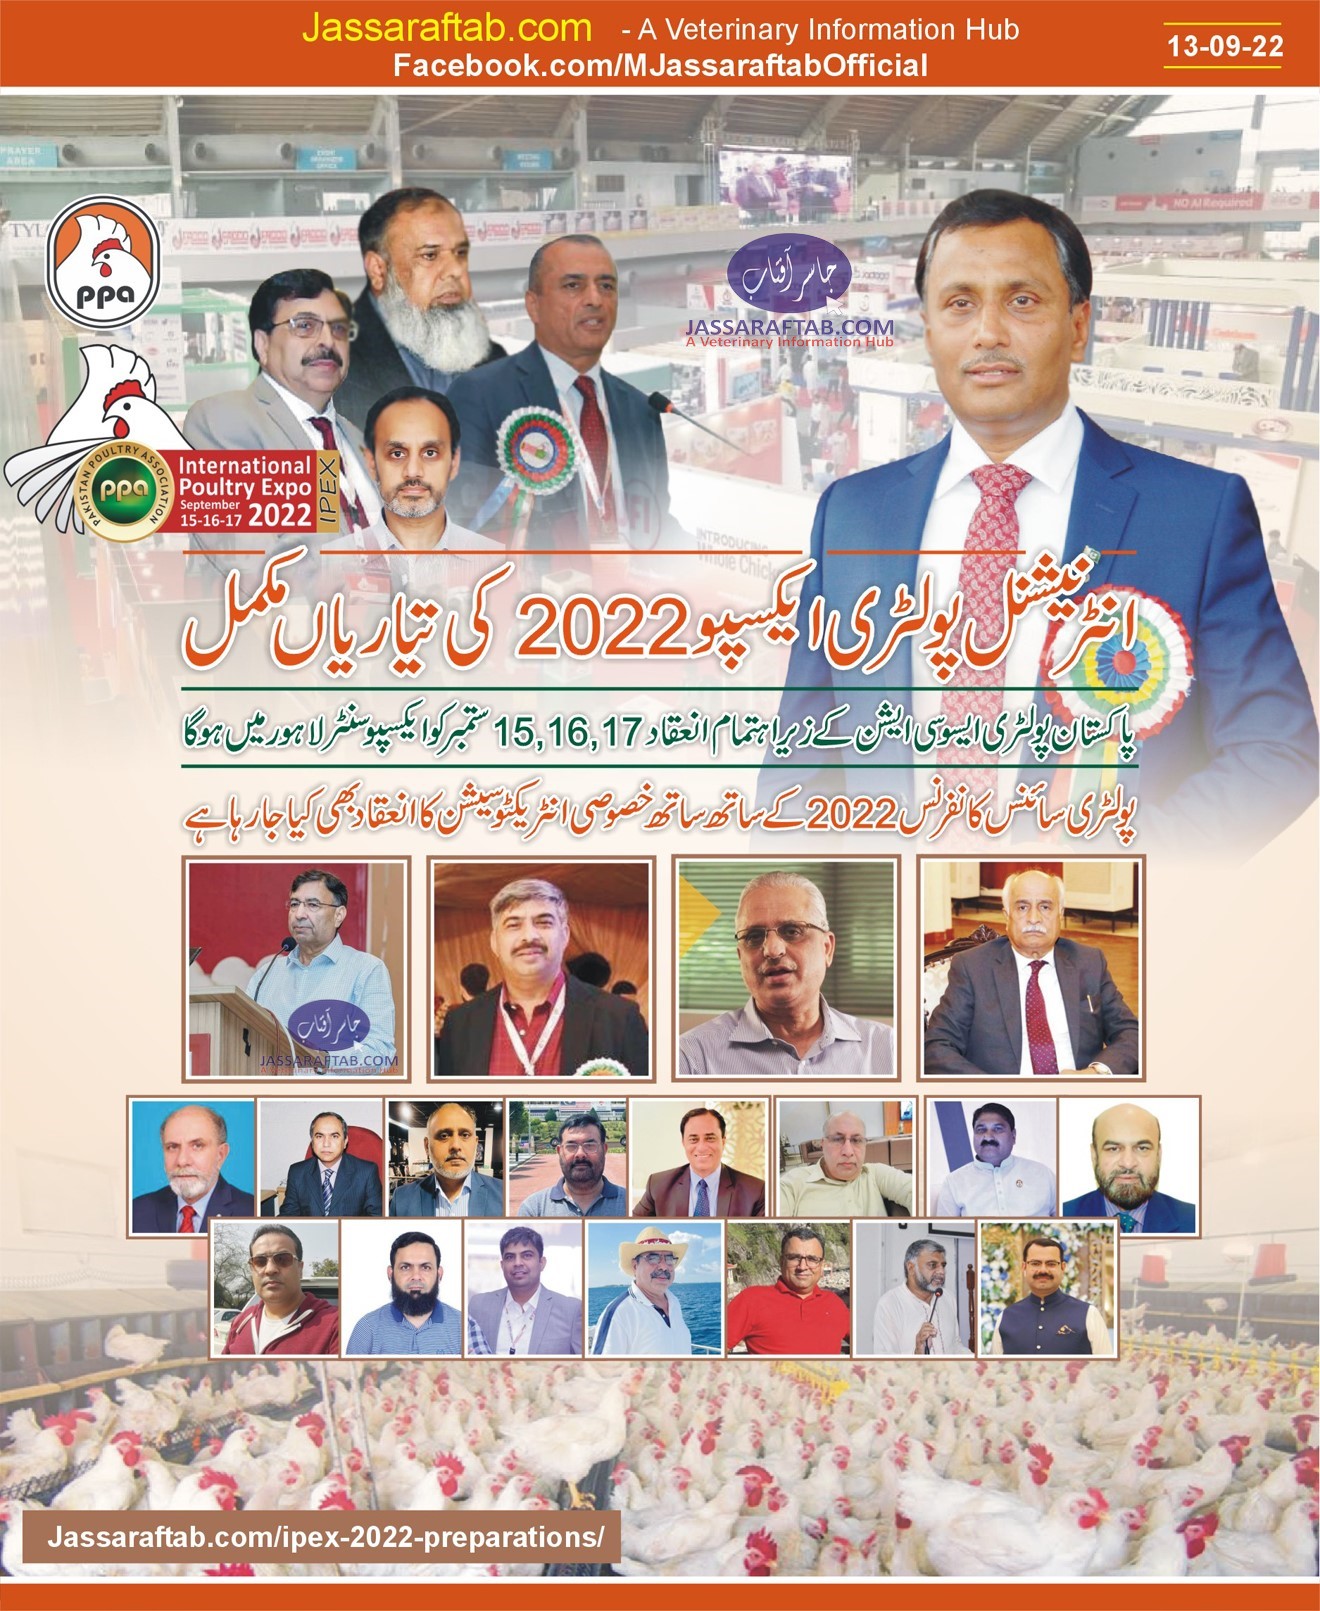 International Poultry Expo going to be held from 15-17 September at Expo Centre Lahore